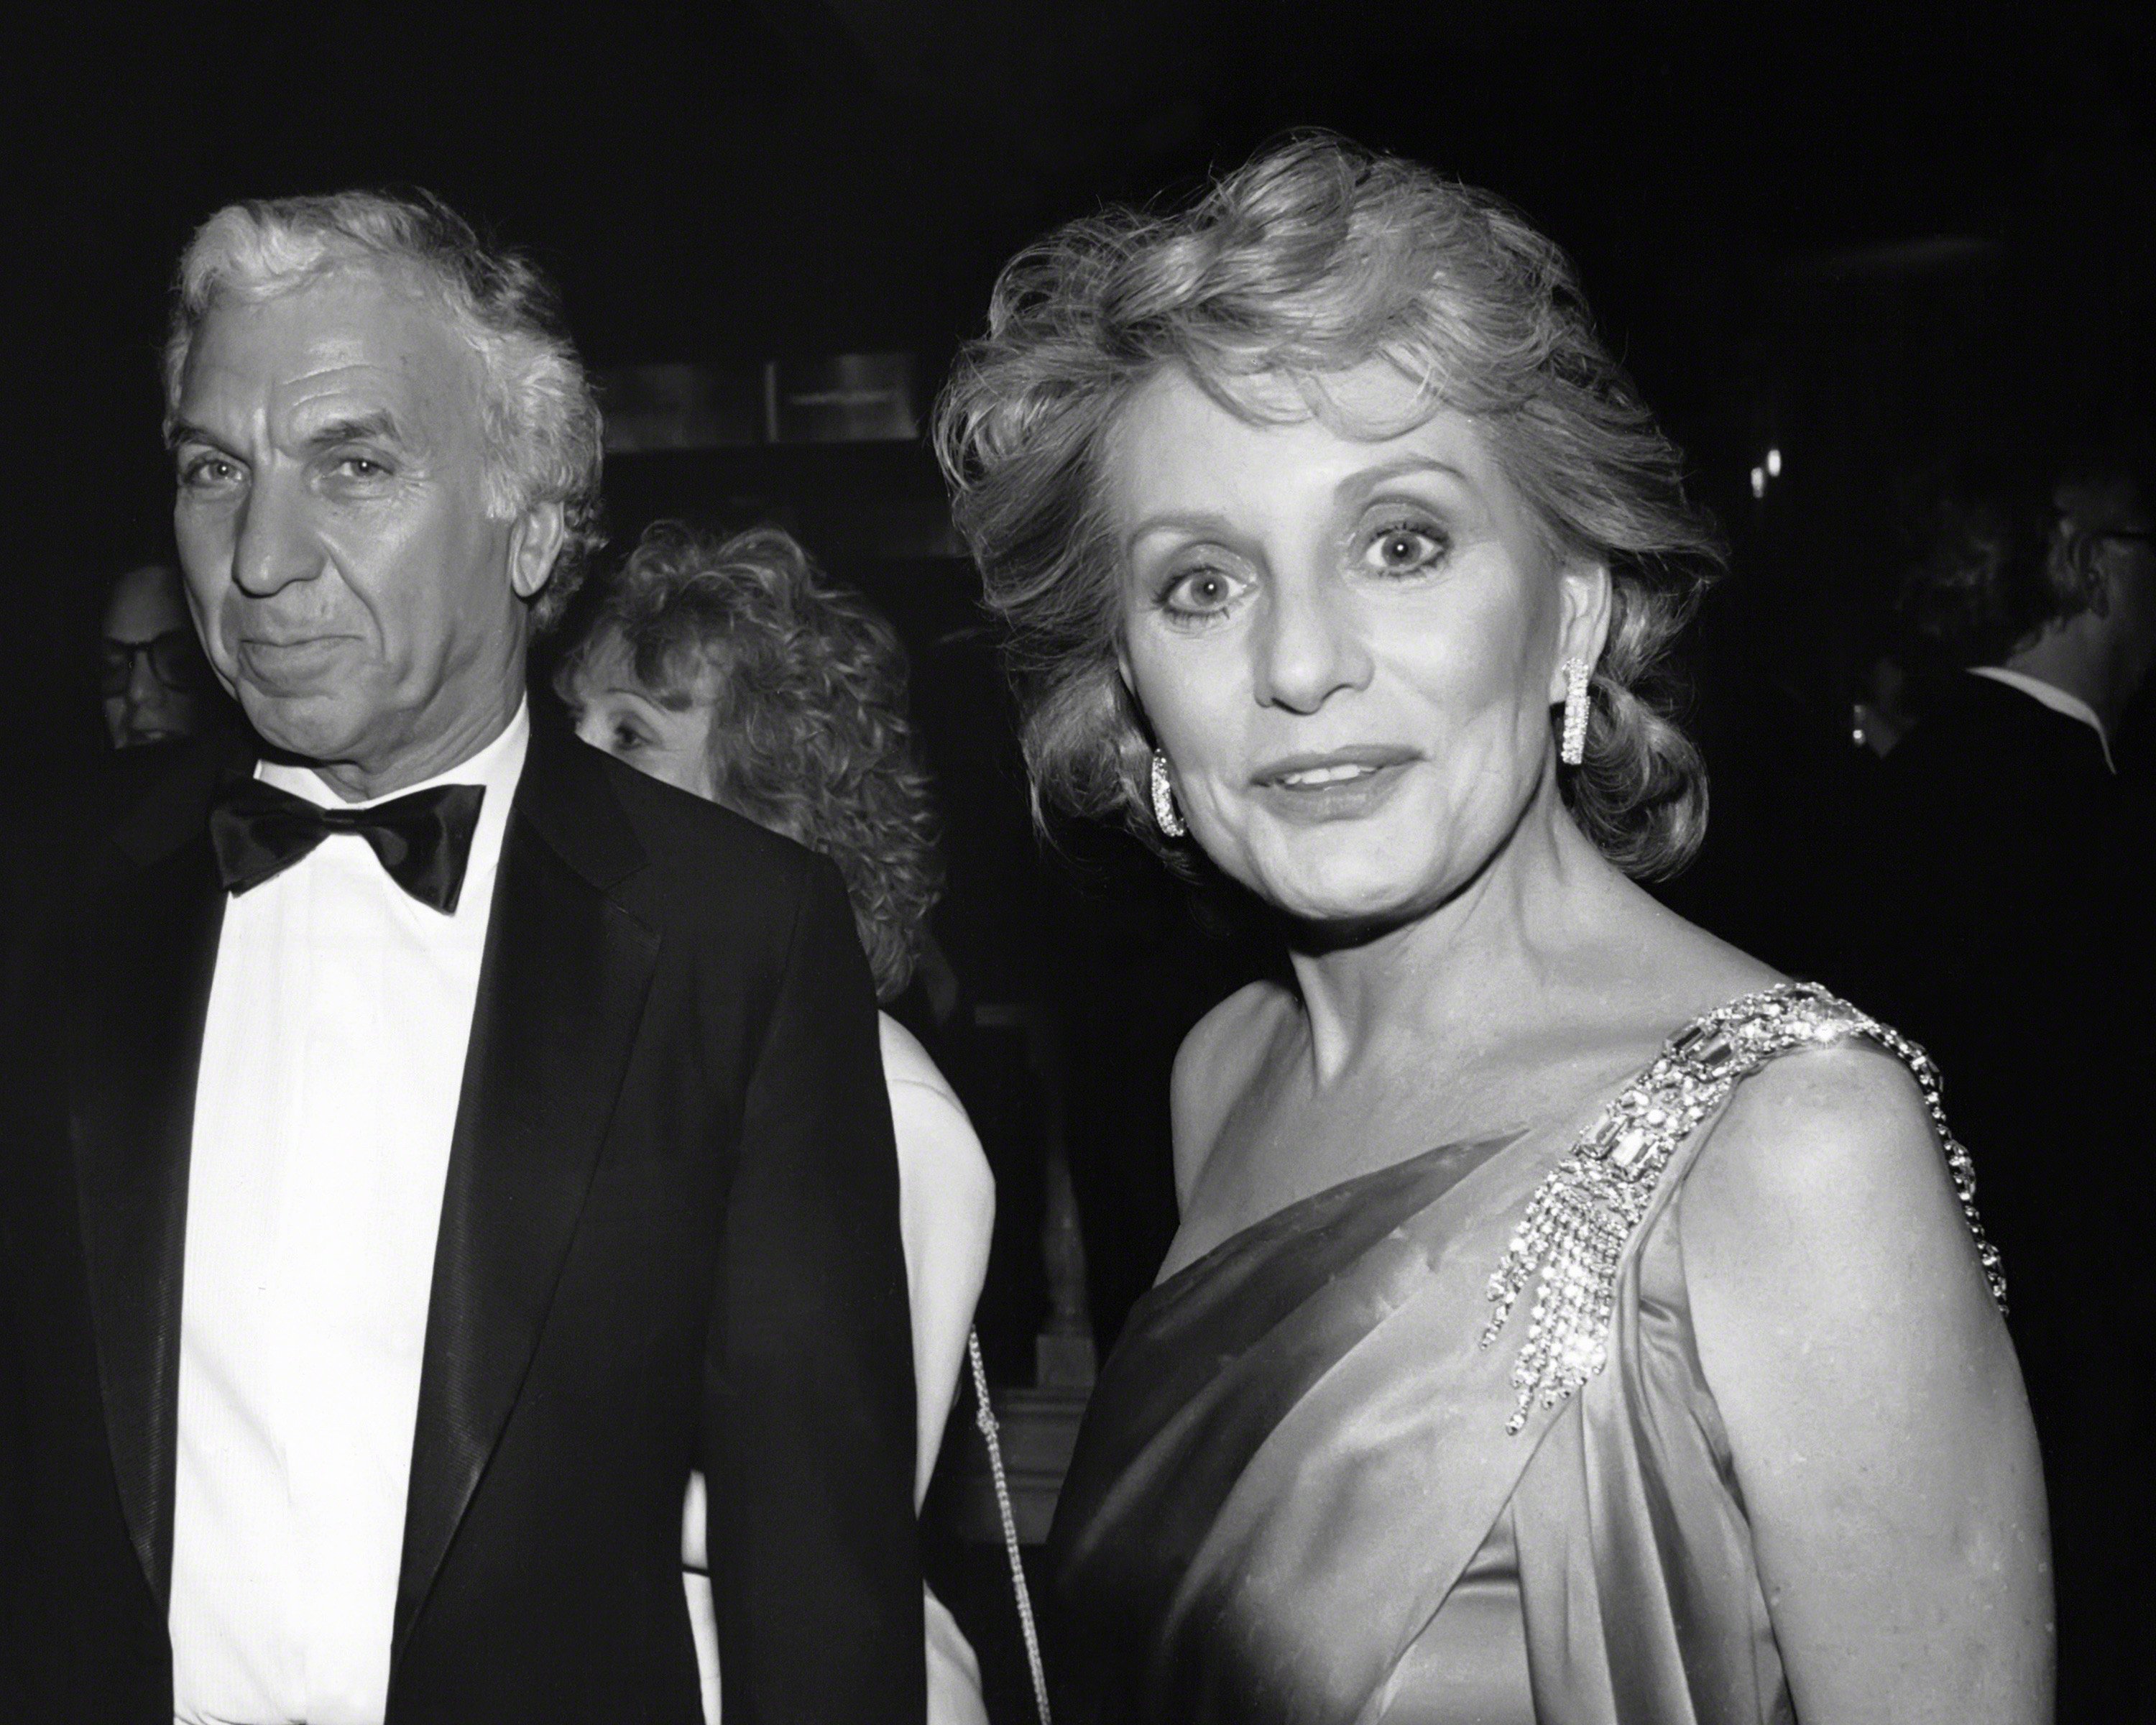 Barbara Walters and Merv Adelson, circa 1985, in New York City  | Photo: Getty Images